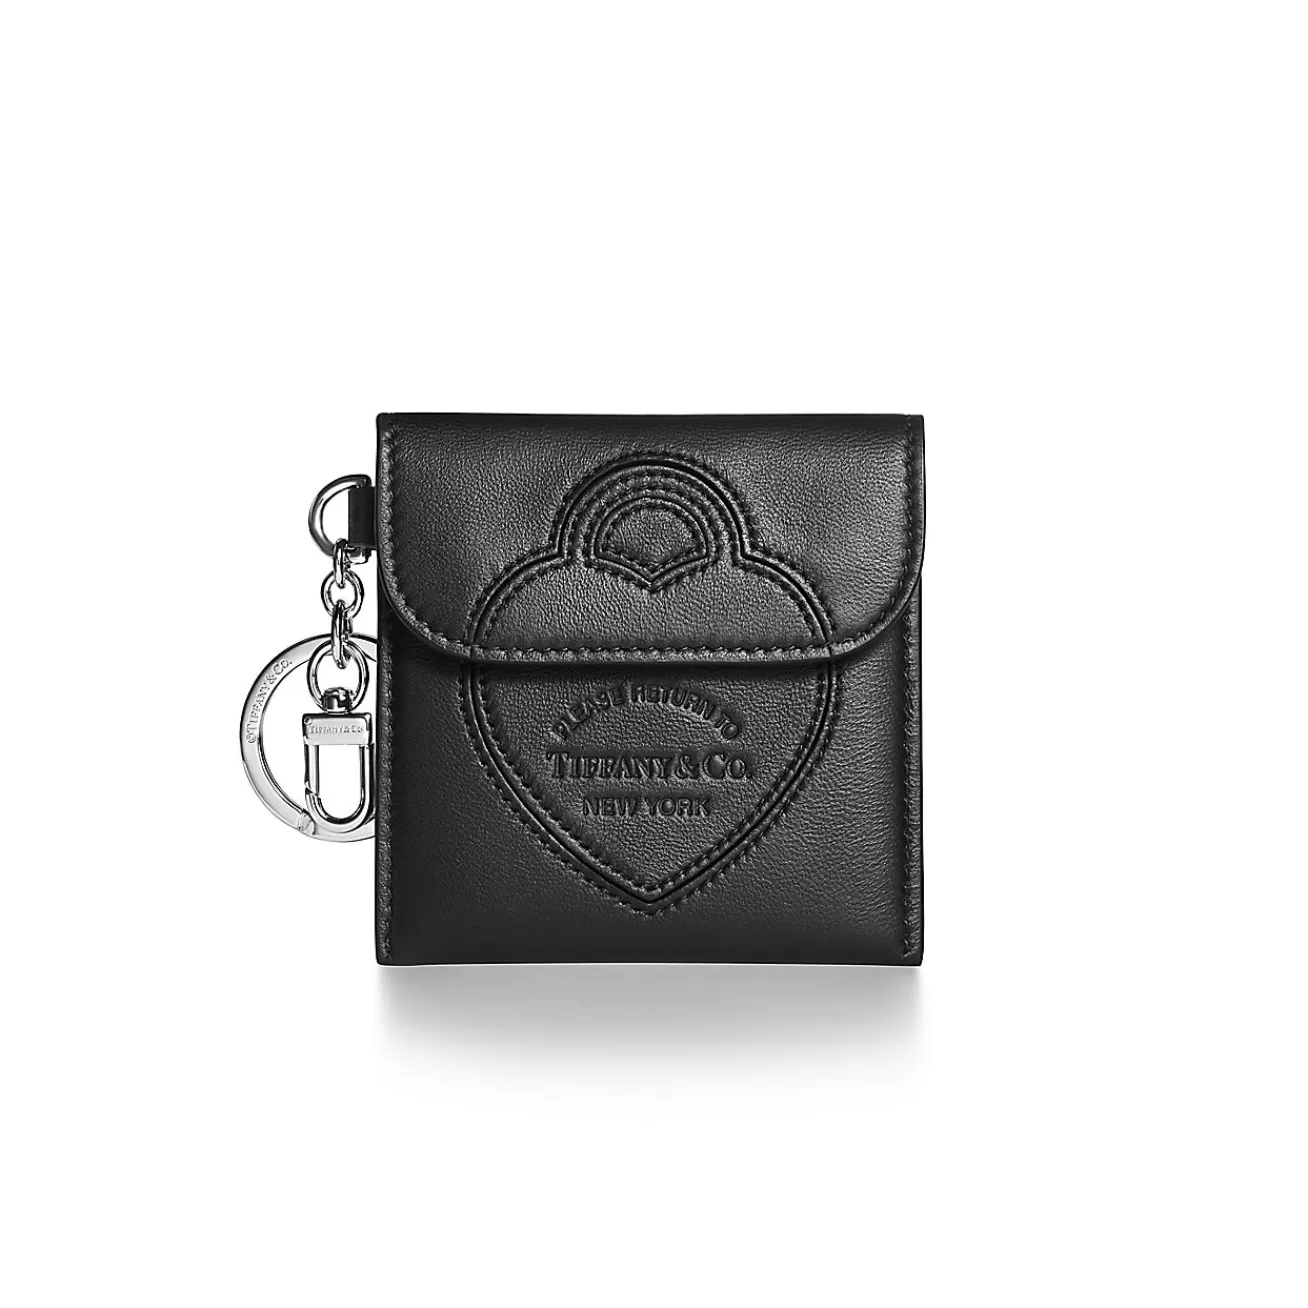 Tiffany & Co. Return to Tiffany® Pouch Bag Charm in Black Leather | ^Women Business Gifts | Small Leather Goods